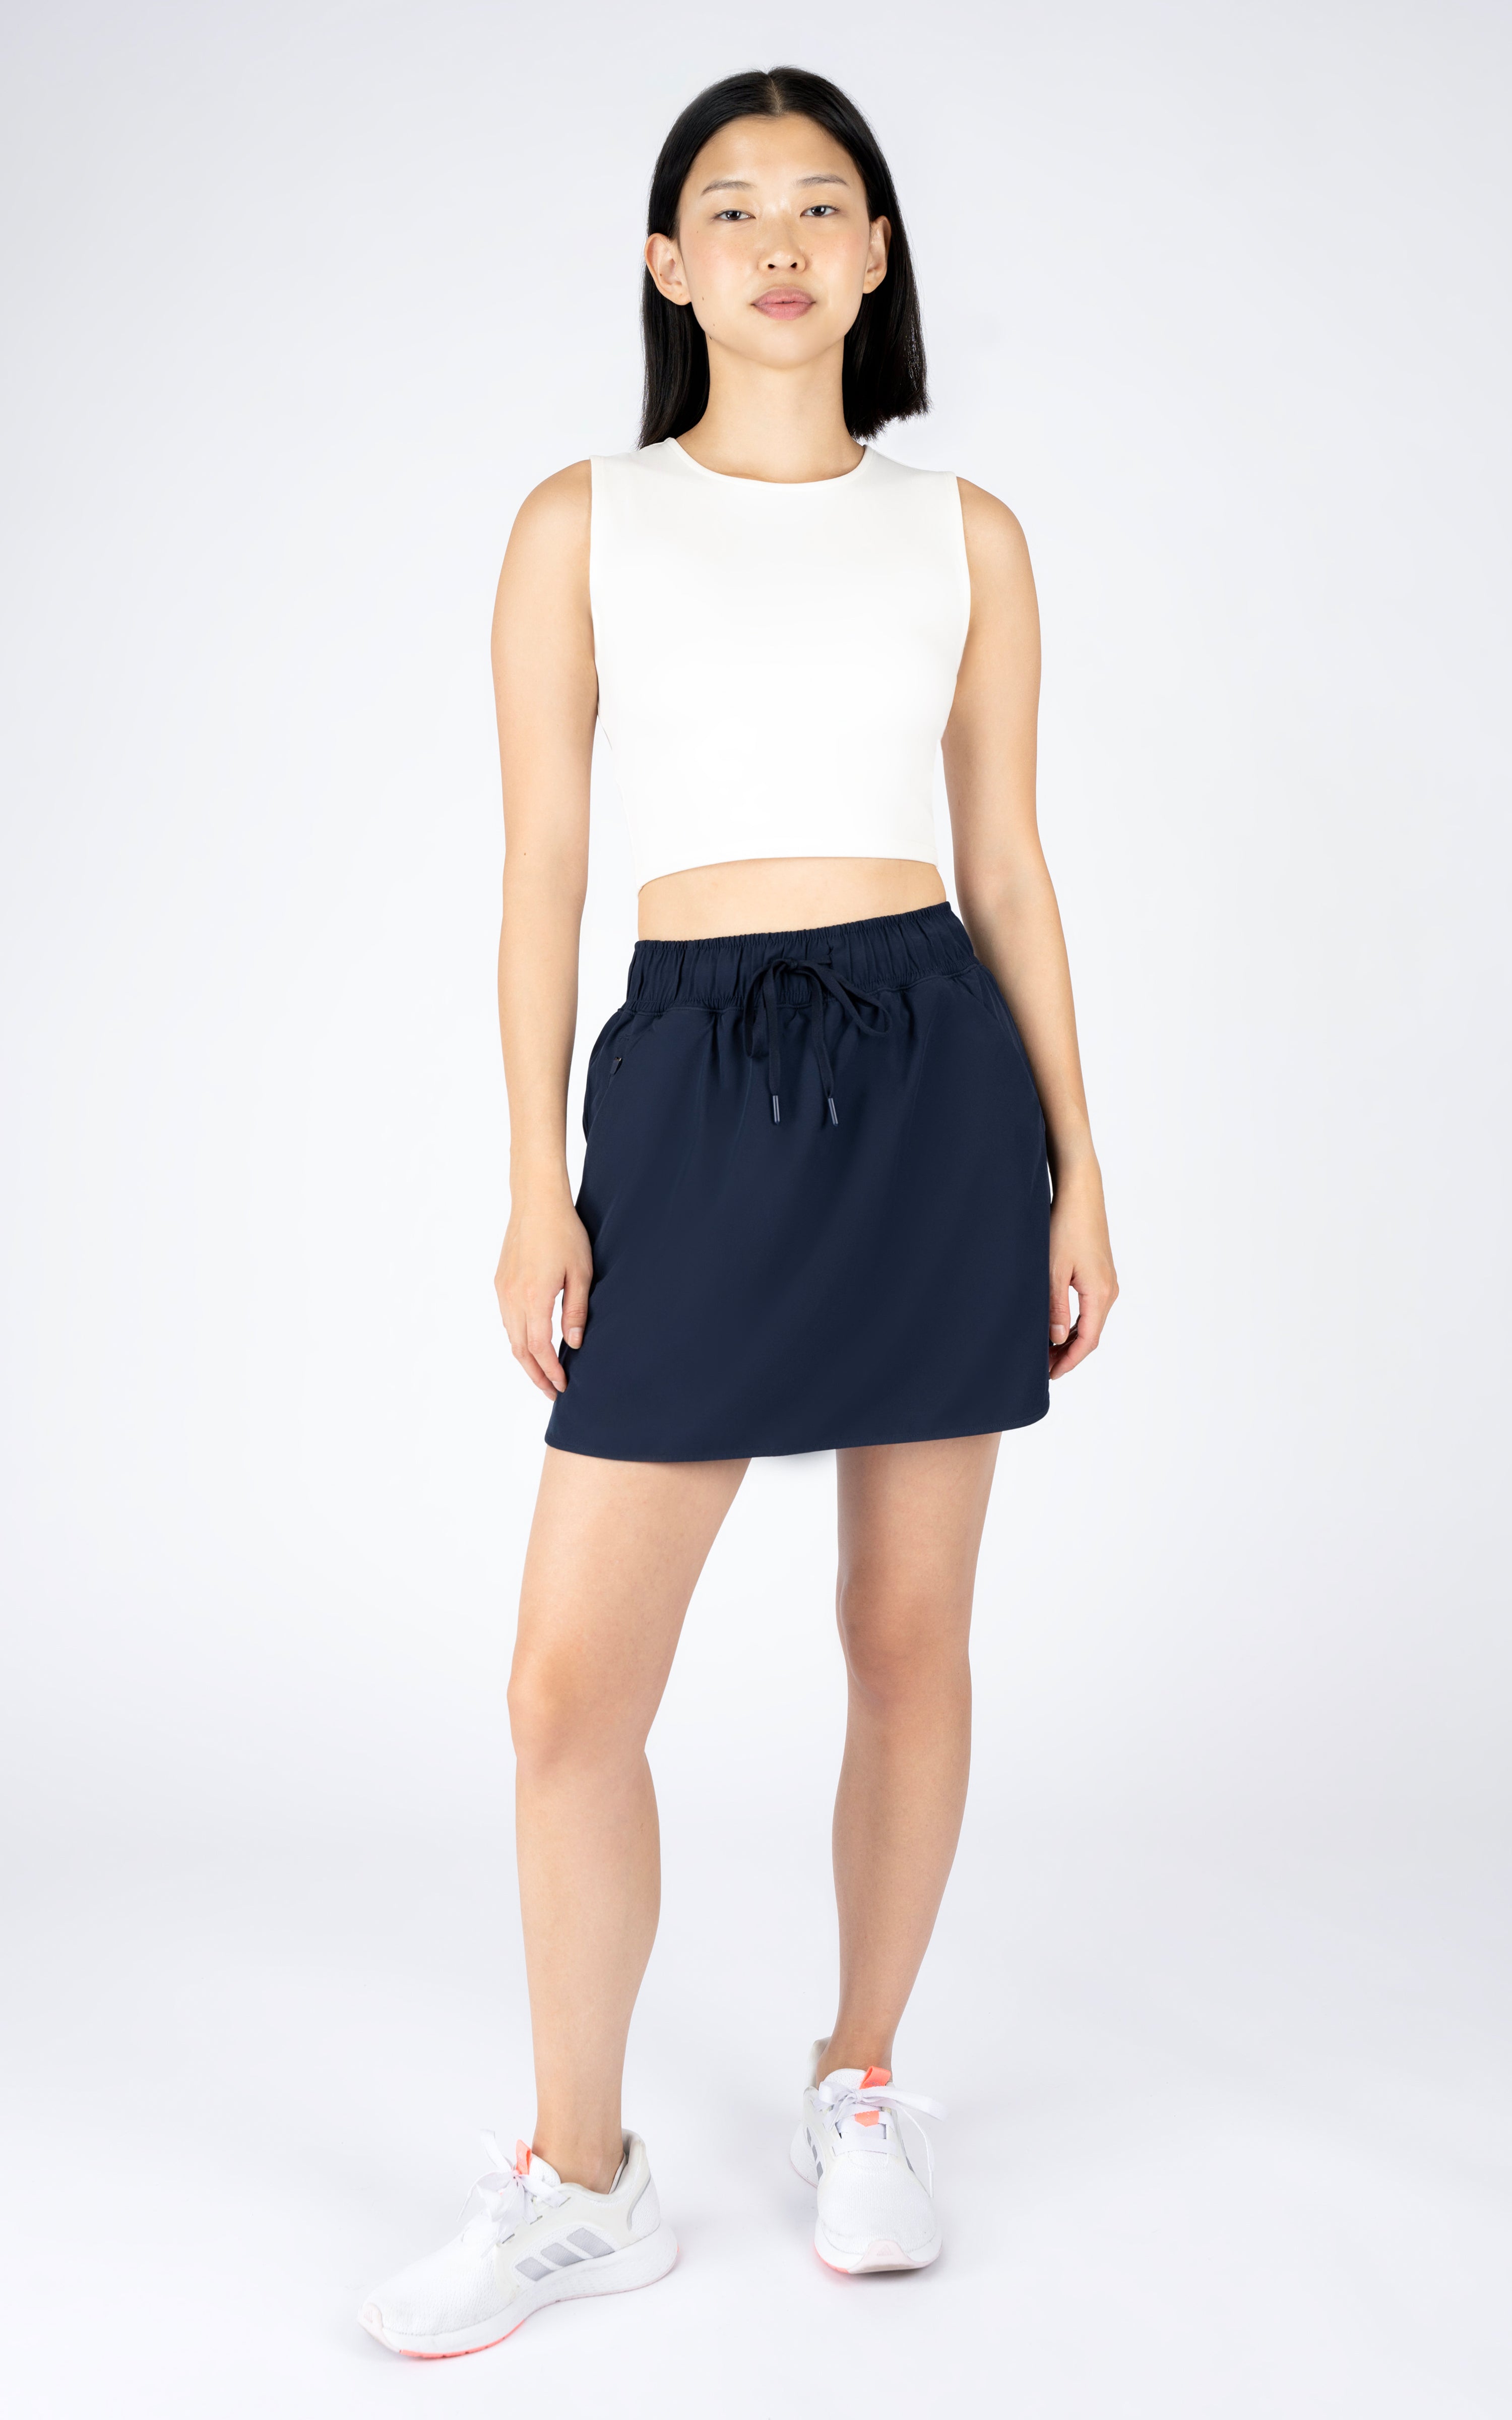 Woven Skort with Side Zipper Pocket and Built-in Shorts